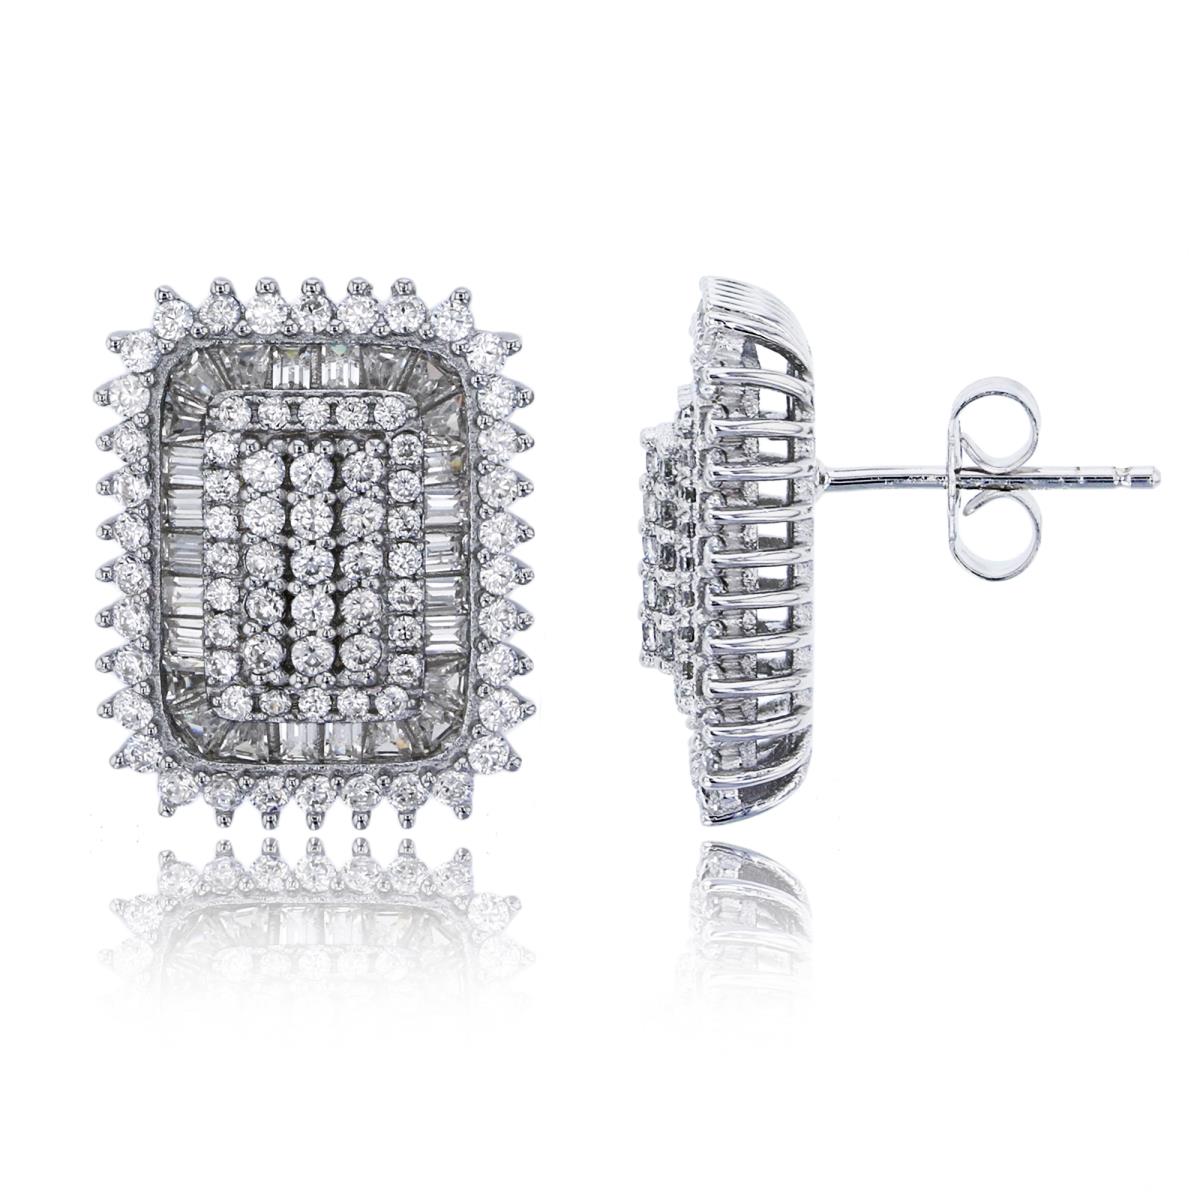 Sterling Silver Rhodium 18x14mm Pave Rd & Baguette CZ Rectangular Stud Earring